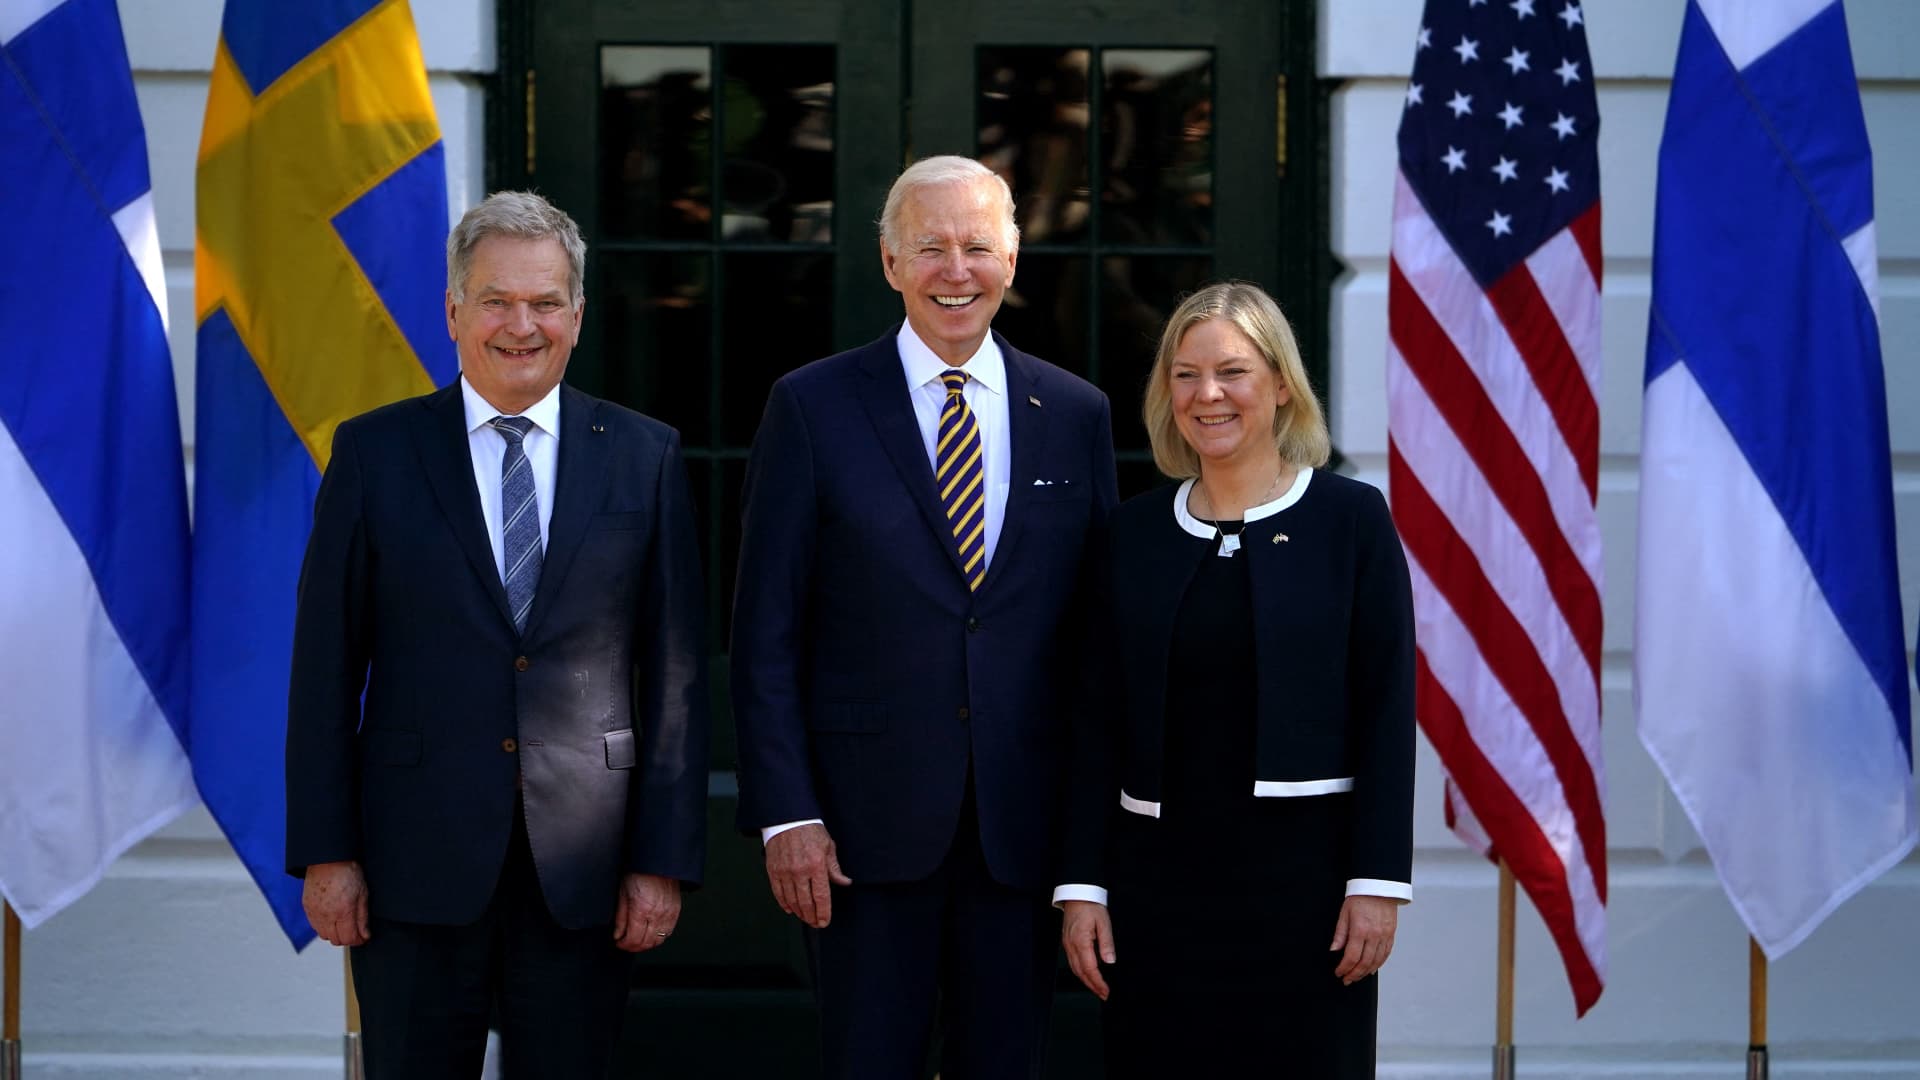 US President Joe Biden (C) welcomes Finnish President Sauli Niinisto (L) and Swedish Prime Minister Magdalena Andersson to the White House in Washington, DC, on May 19, 2022.